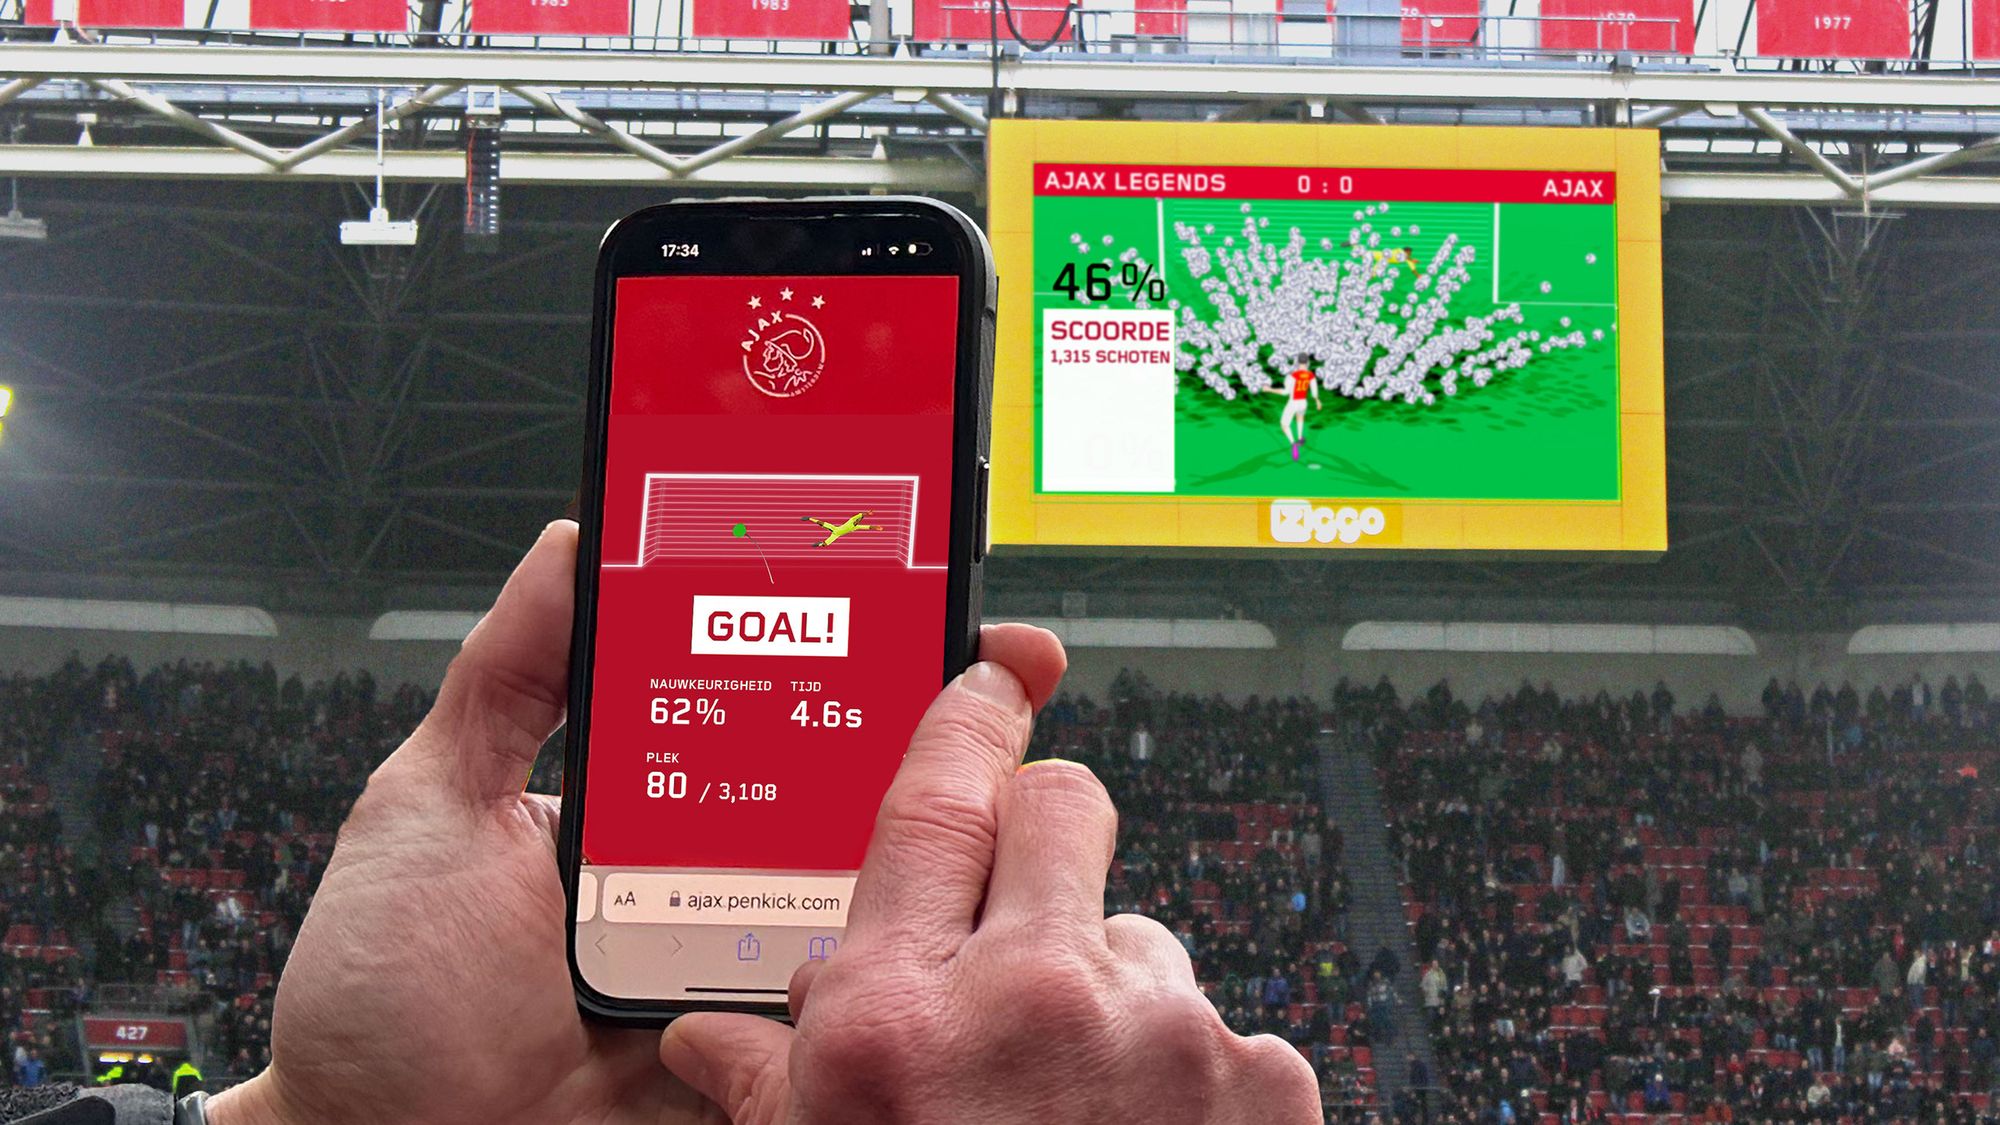 Photograph of some hands holding a phone with a full stadium in the background. On the stadium's big screen a penalty is being taken with thousands of ball flying at the goal. The phone screen has an image of a goal and goal keeper with the word 'goal' and some stats below the image